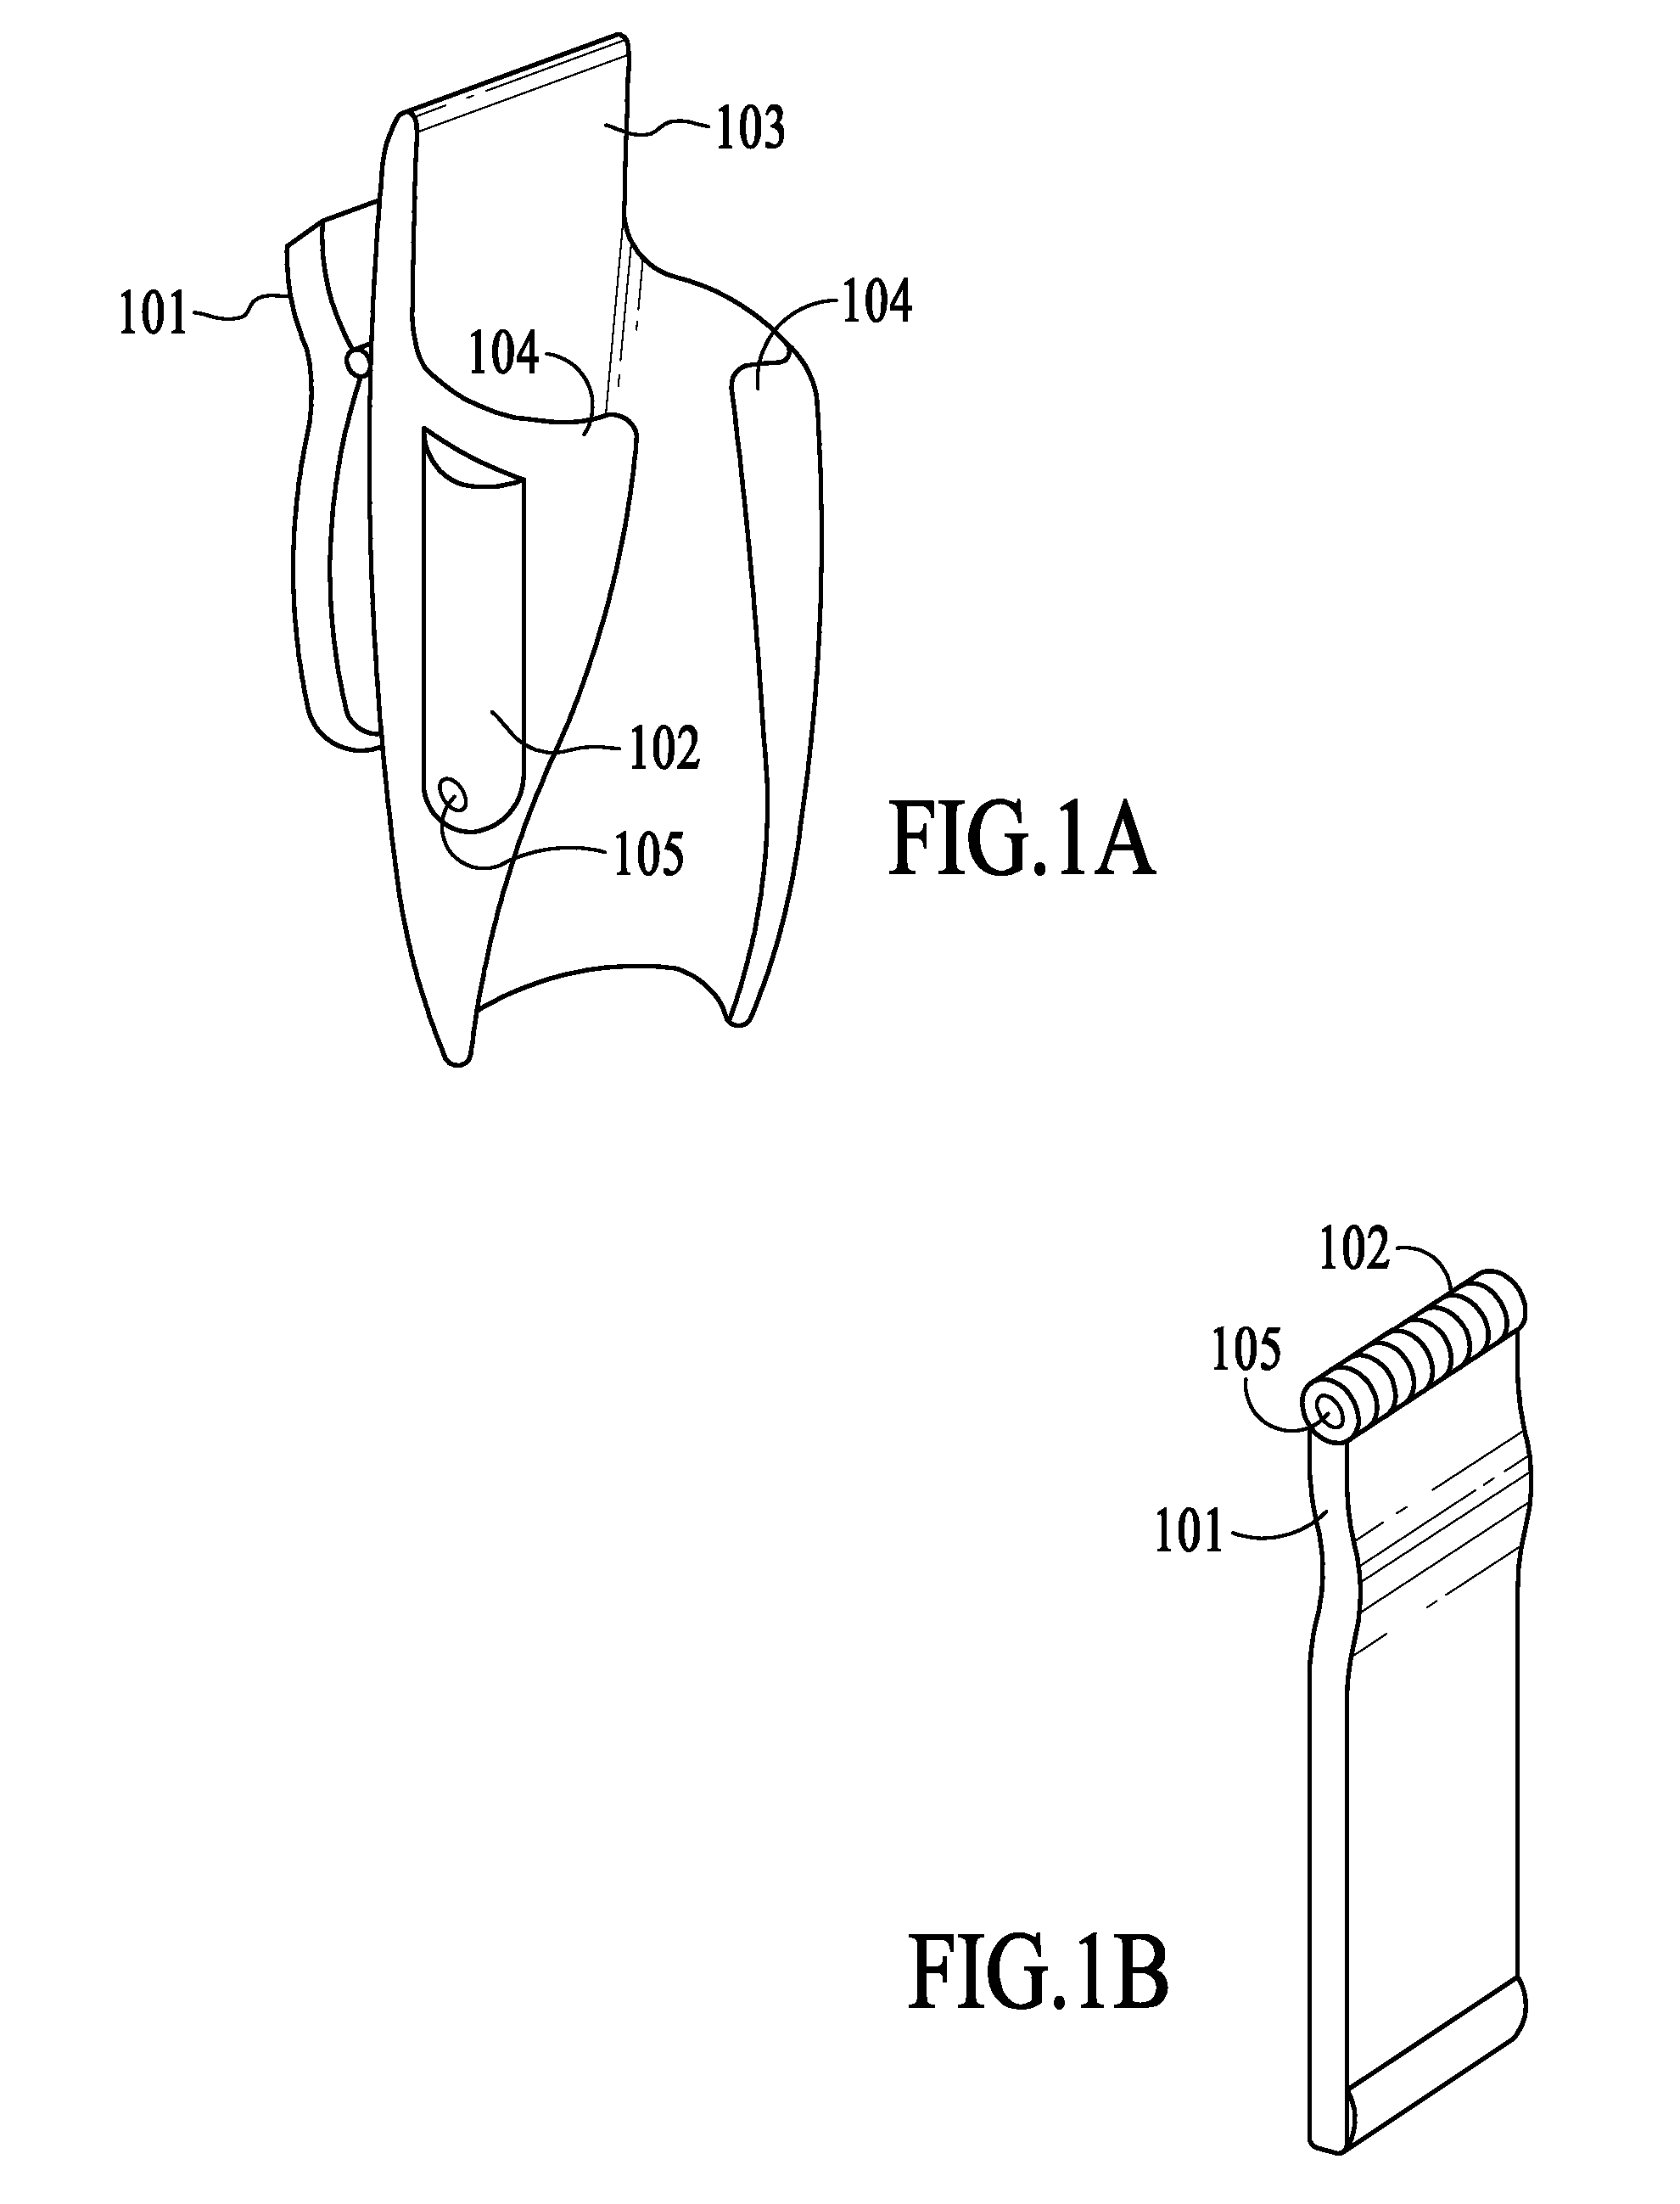 Glucose measuring device integrated into a holster for a personal area network device